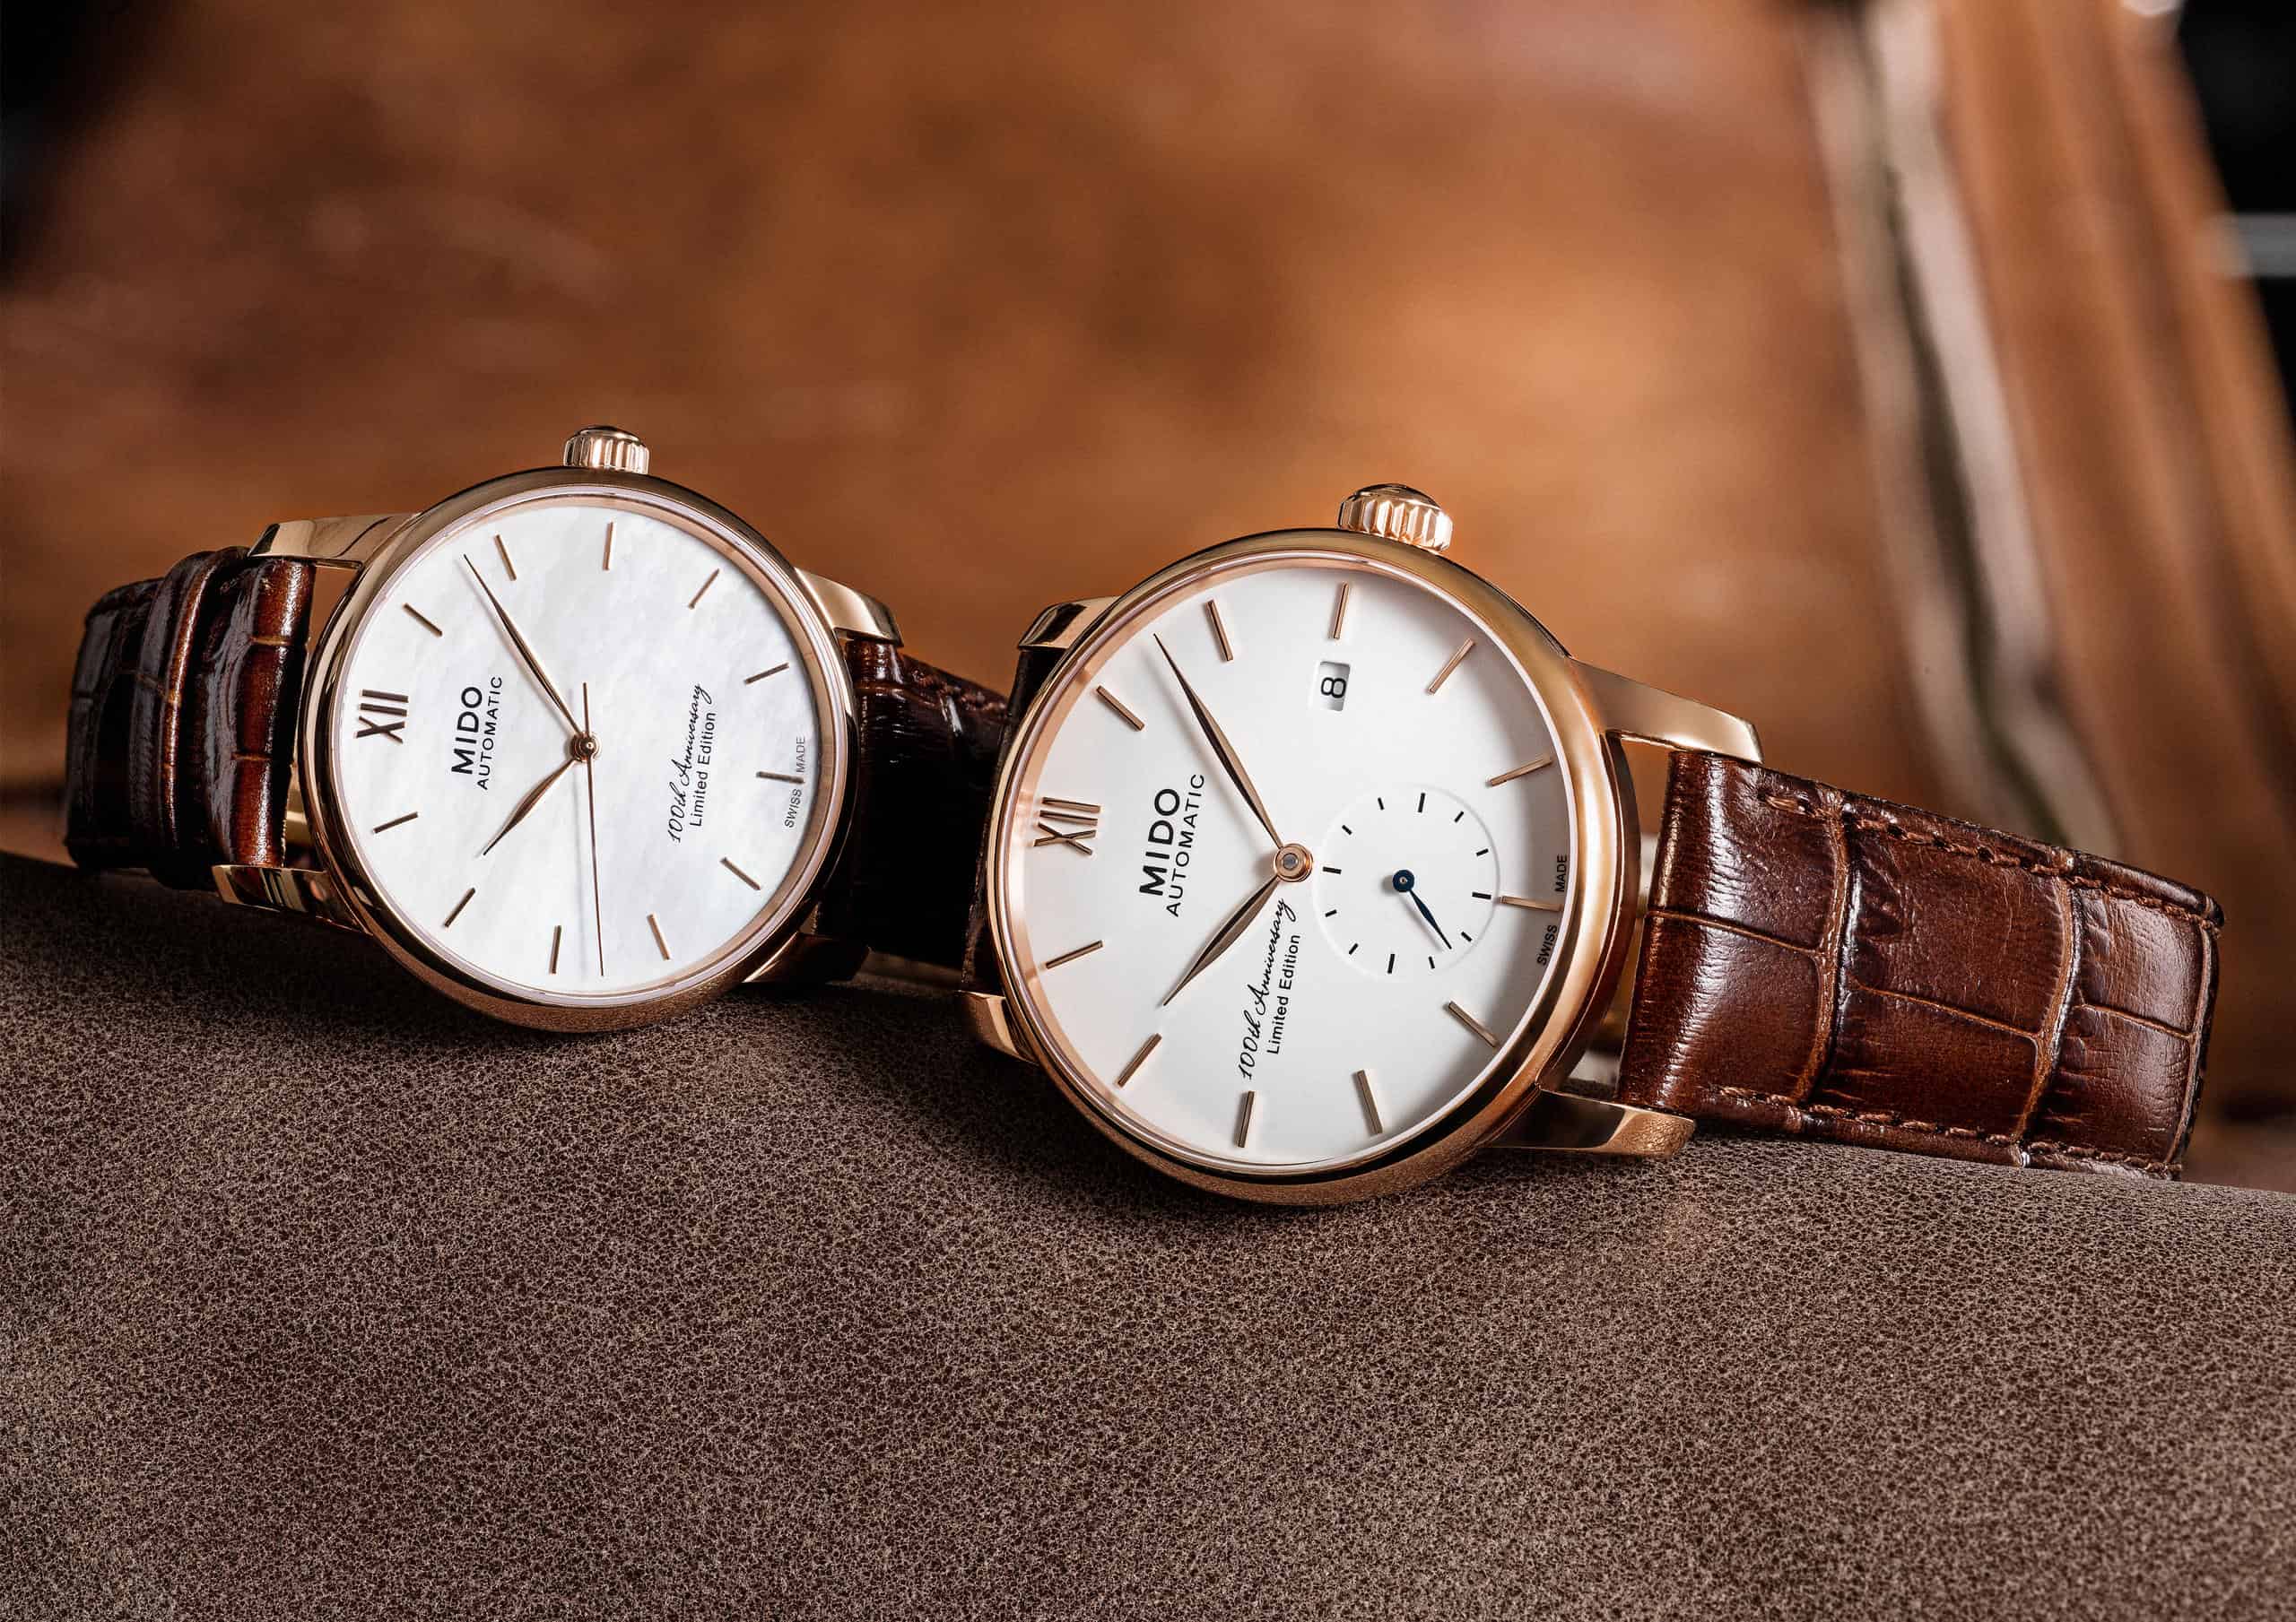 Introducing the Mido Baroncelli 100th Anniversary Limited Editions for Men and Women